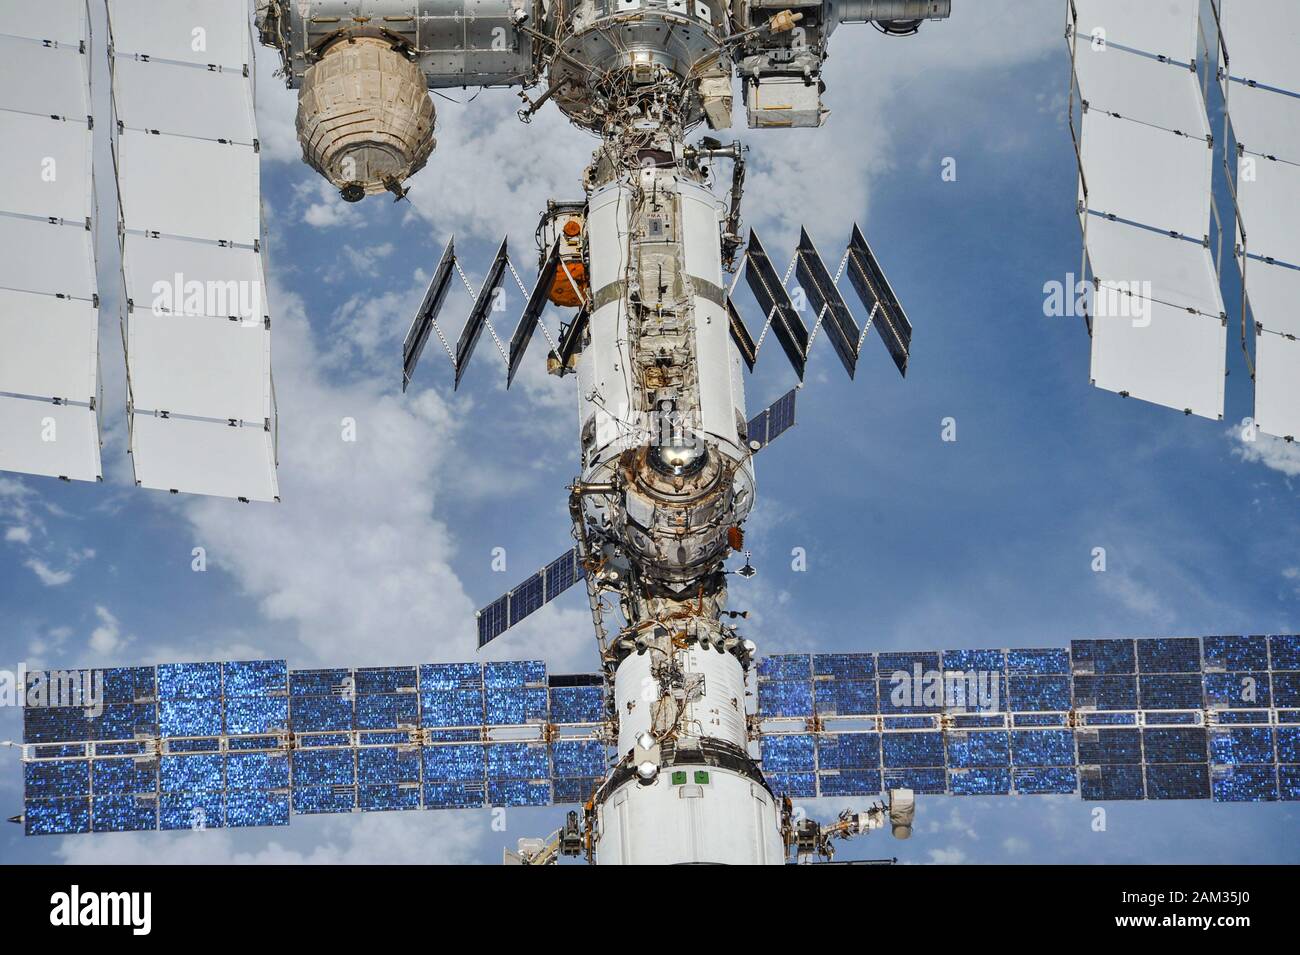 The International Space Station photographed by Expedition 56 crew members from a Soyuz spacecraft after undocking on 4 Oct 2018 Stock Photo